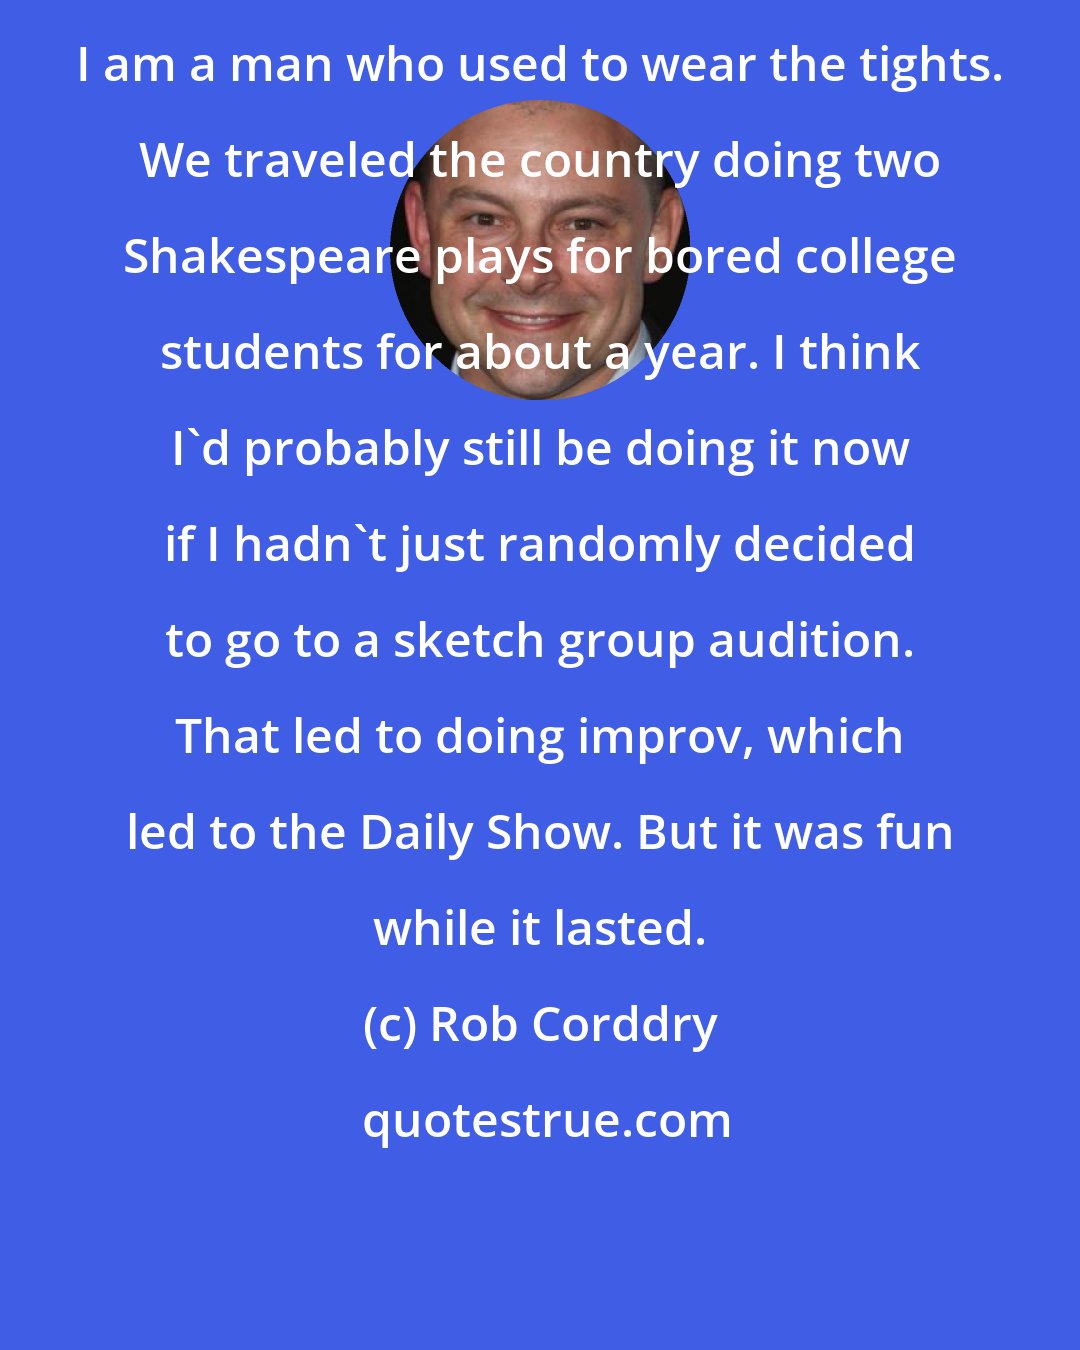 Rob Corddry: I am a man who used to wear the tights. We traveled the country doing two Shakespeare plays for bored college students for about a year. I think I'd probably still be doing it now if I hadn't just randomly decided to go to a sketch group audition. That led to doing improv, which led to the Daily Show. But it was fun while it lasted.